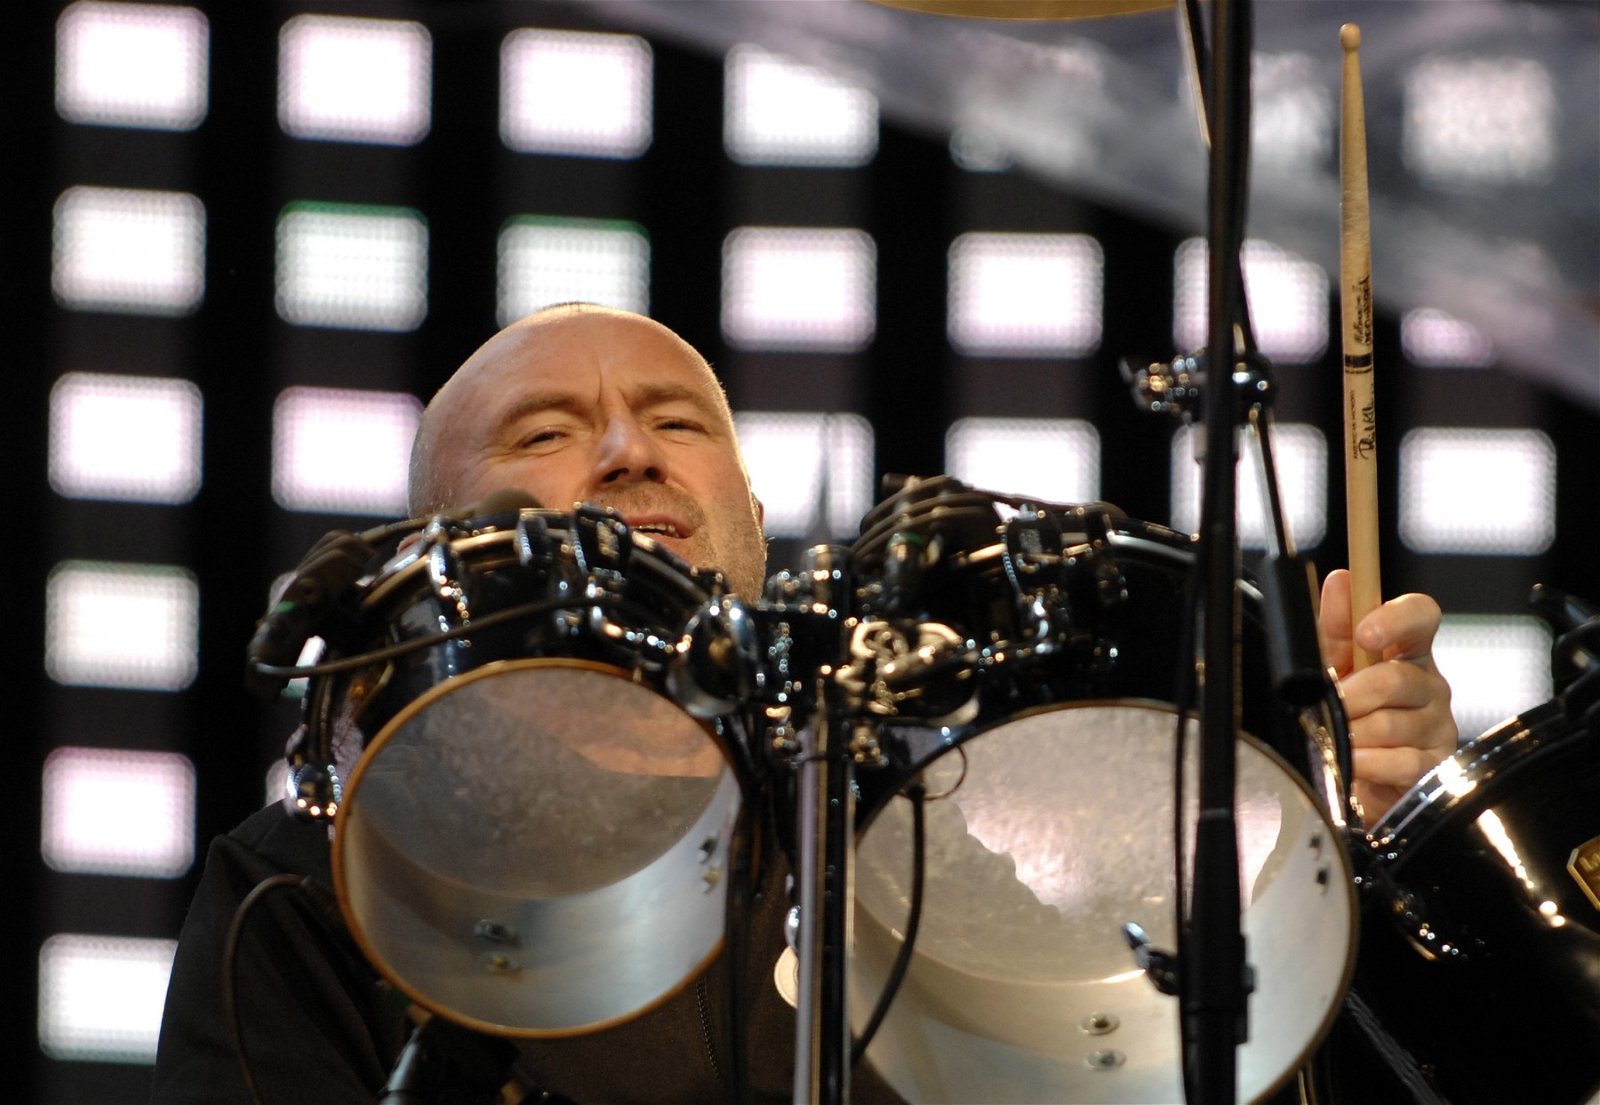 Phil Collins is in a terrible state, according to his former musical partner, and he does not deserve what is happening to him